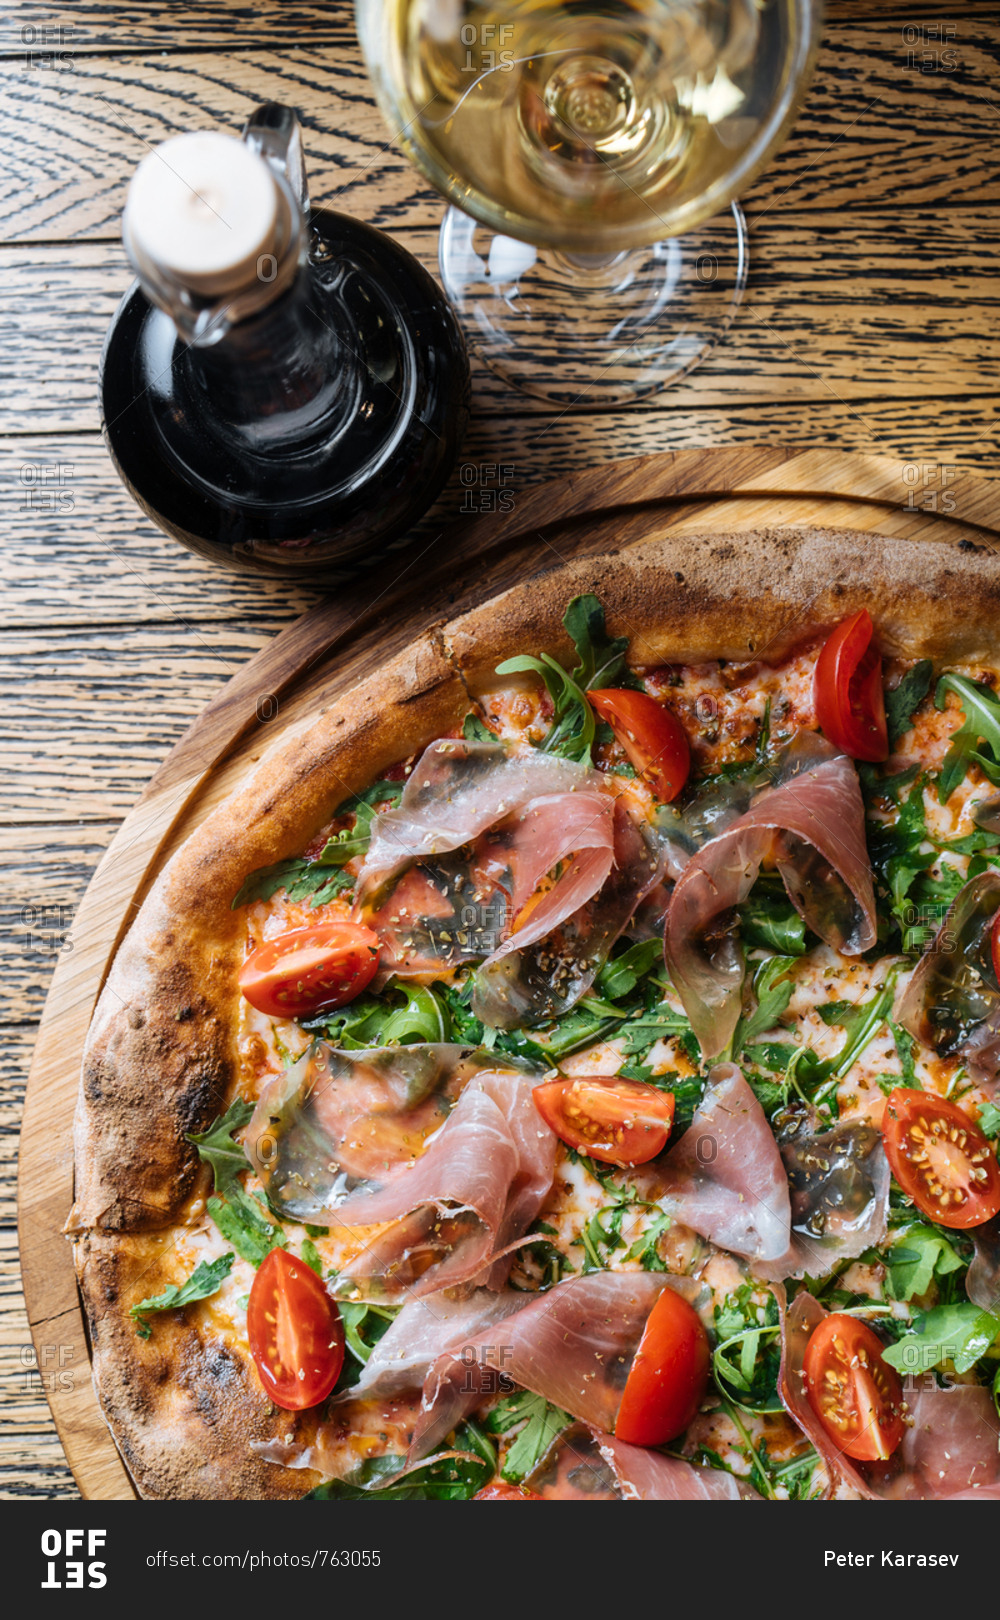 Gourmet pizza served with balsamic vinegar and white wine